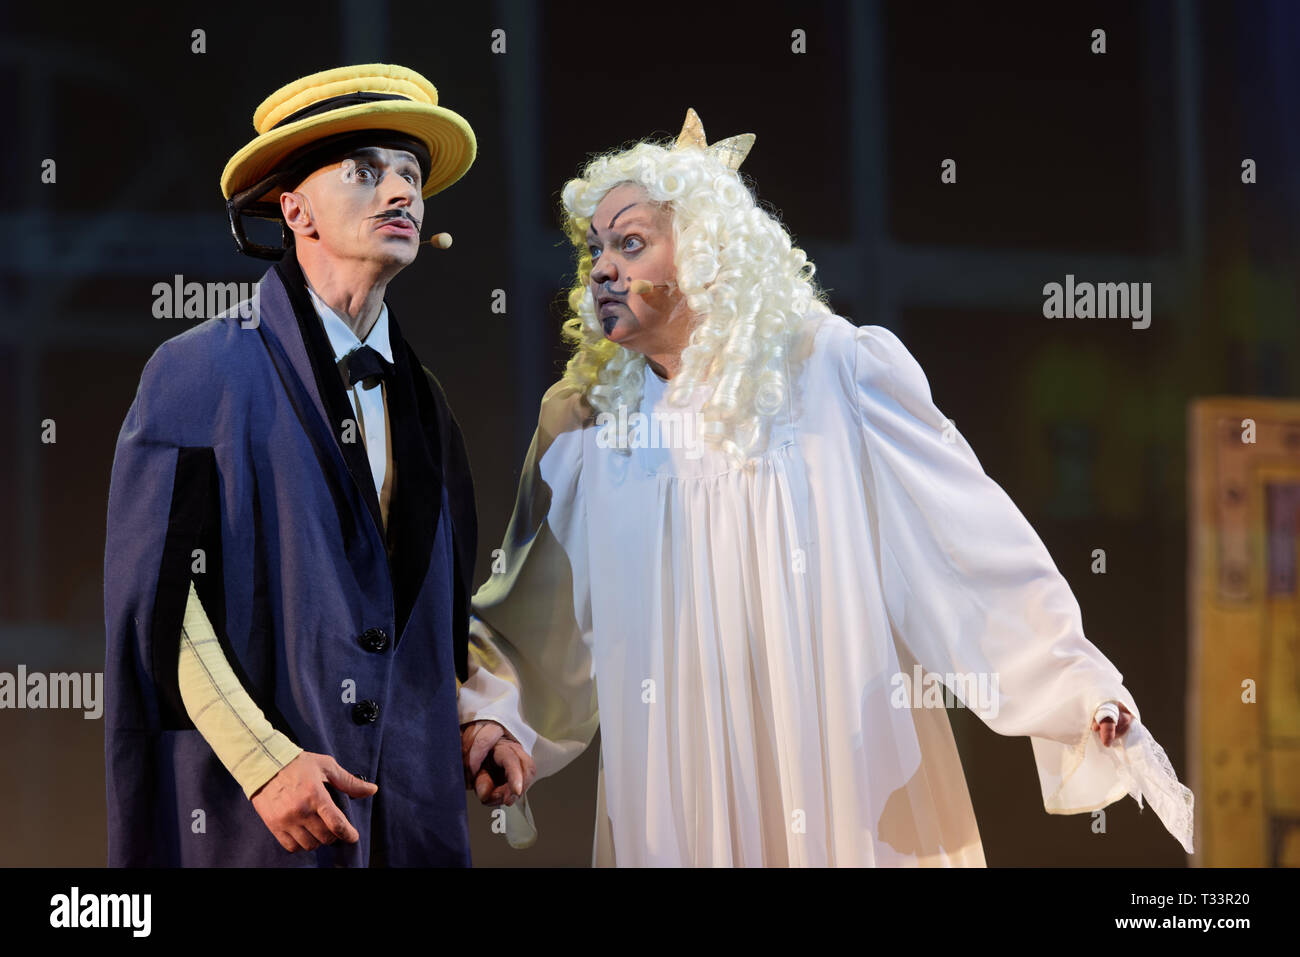 St. Petersburg, Russia - March 25, 2019: Oleg Kulikovich (right) as King and Igor Mosyuk as Detective in the musical Town Musicians of Bremen during i Stock Photo